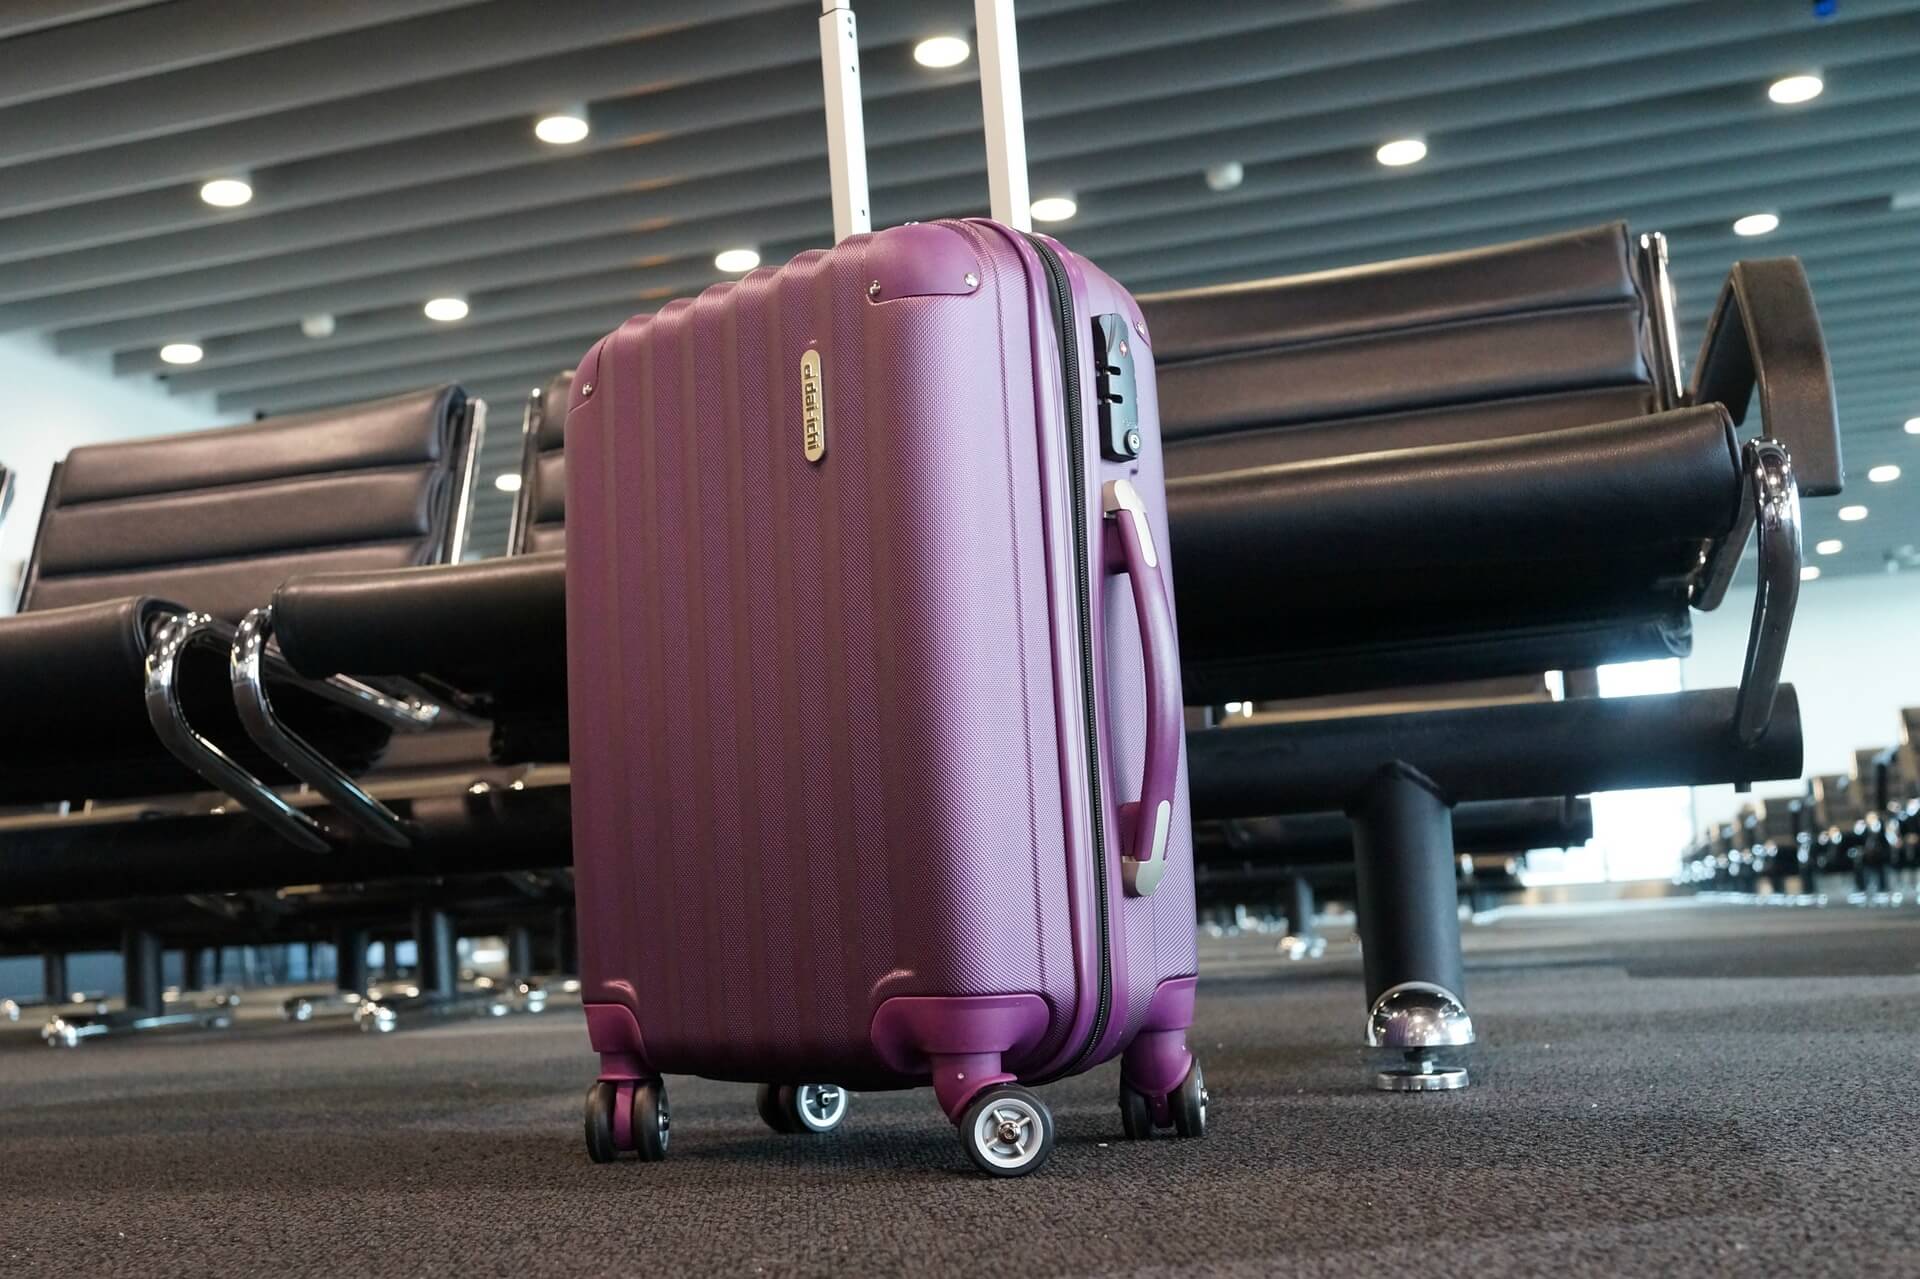 New-Technology-Could-Mean-Easier-Restrictions-on-Carry-on-Liquids